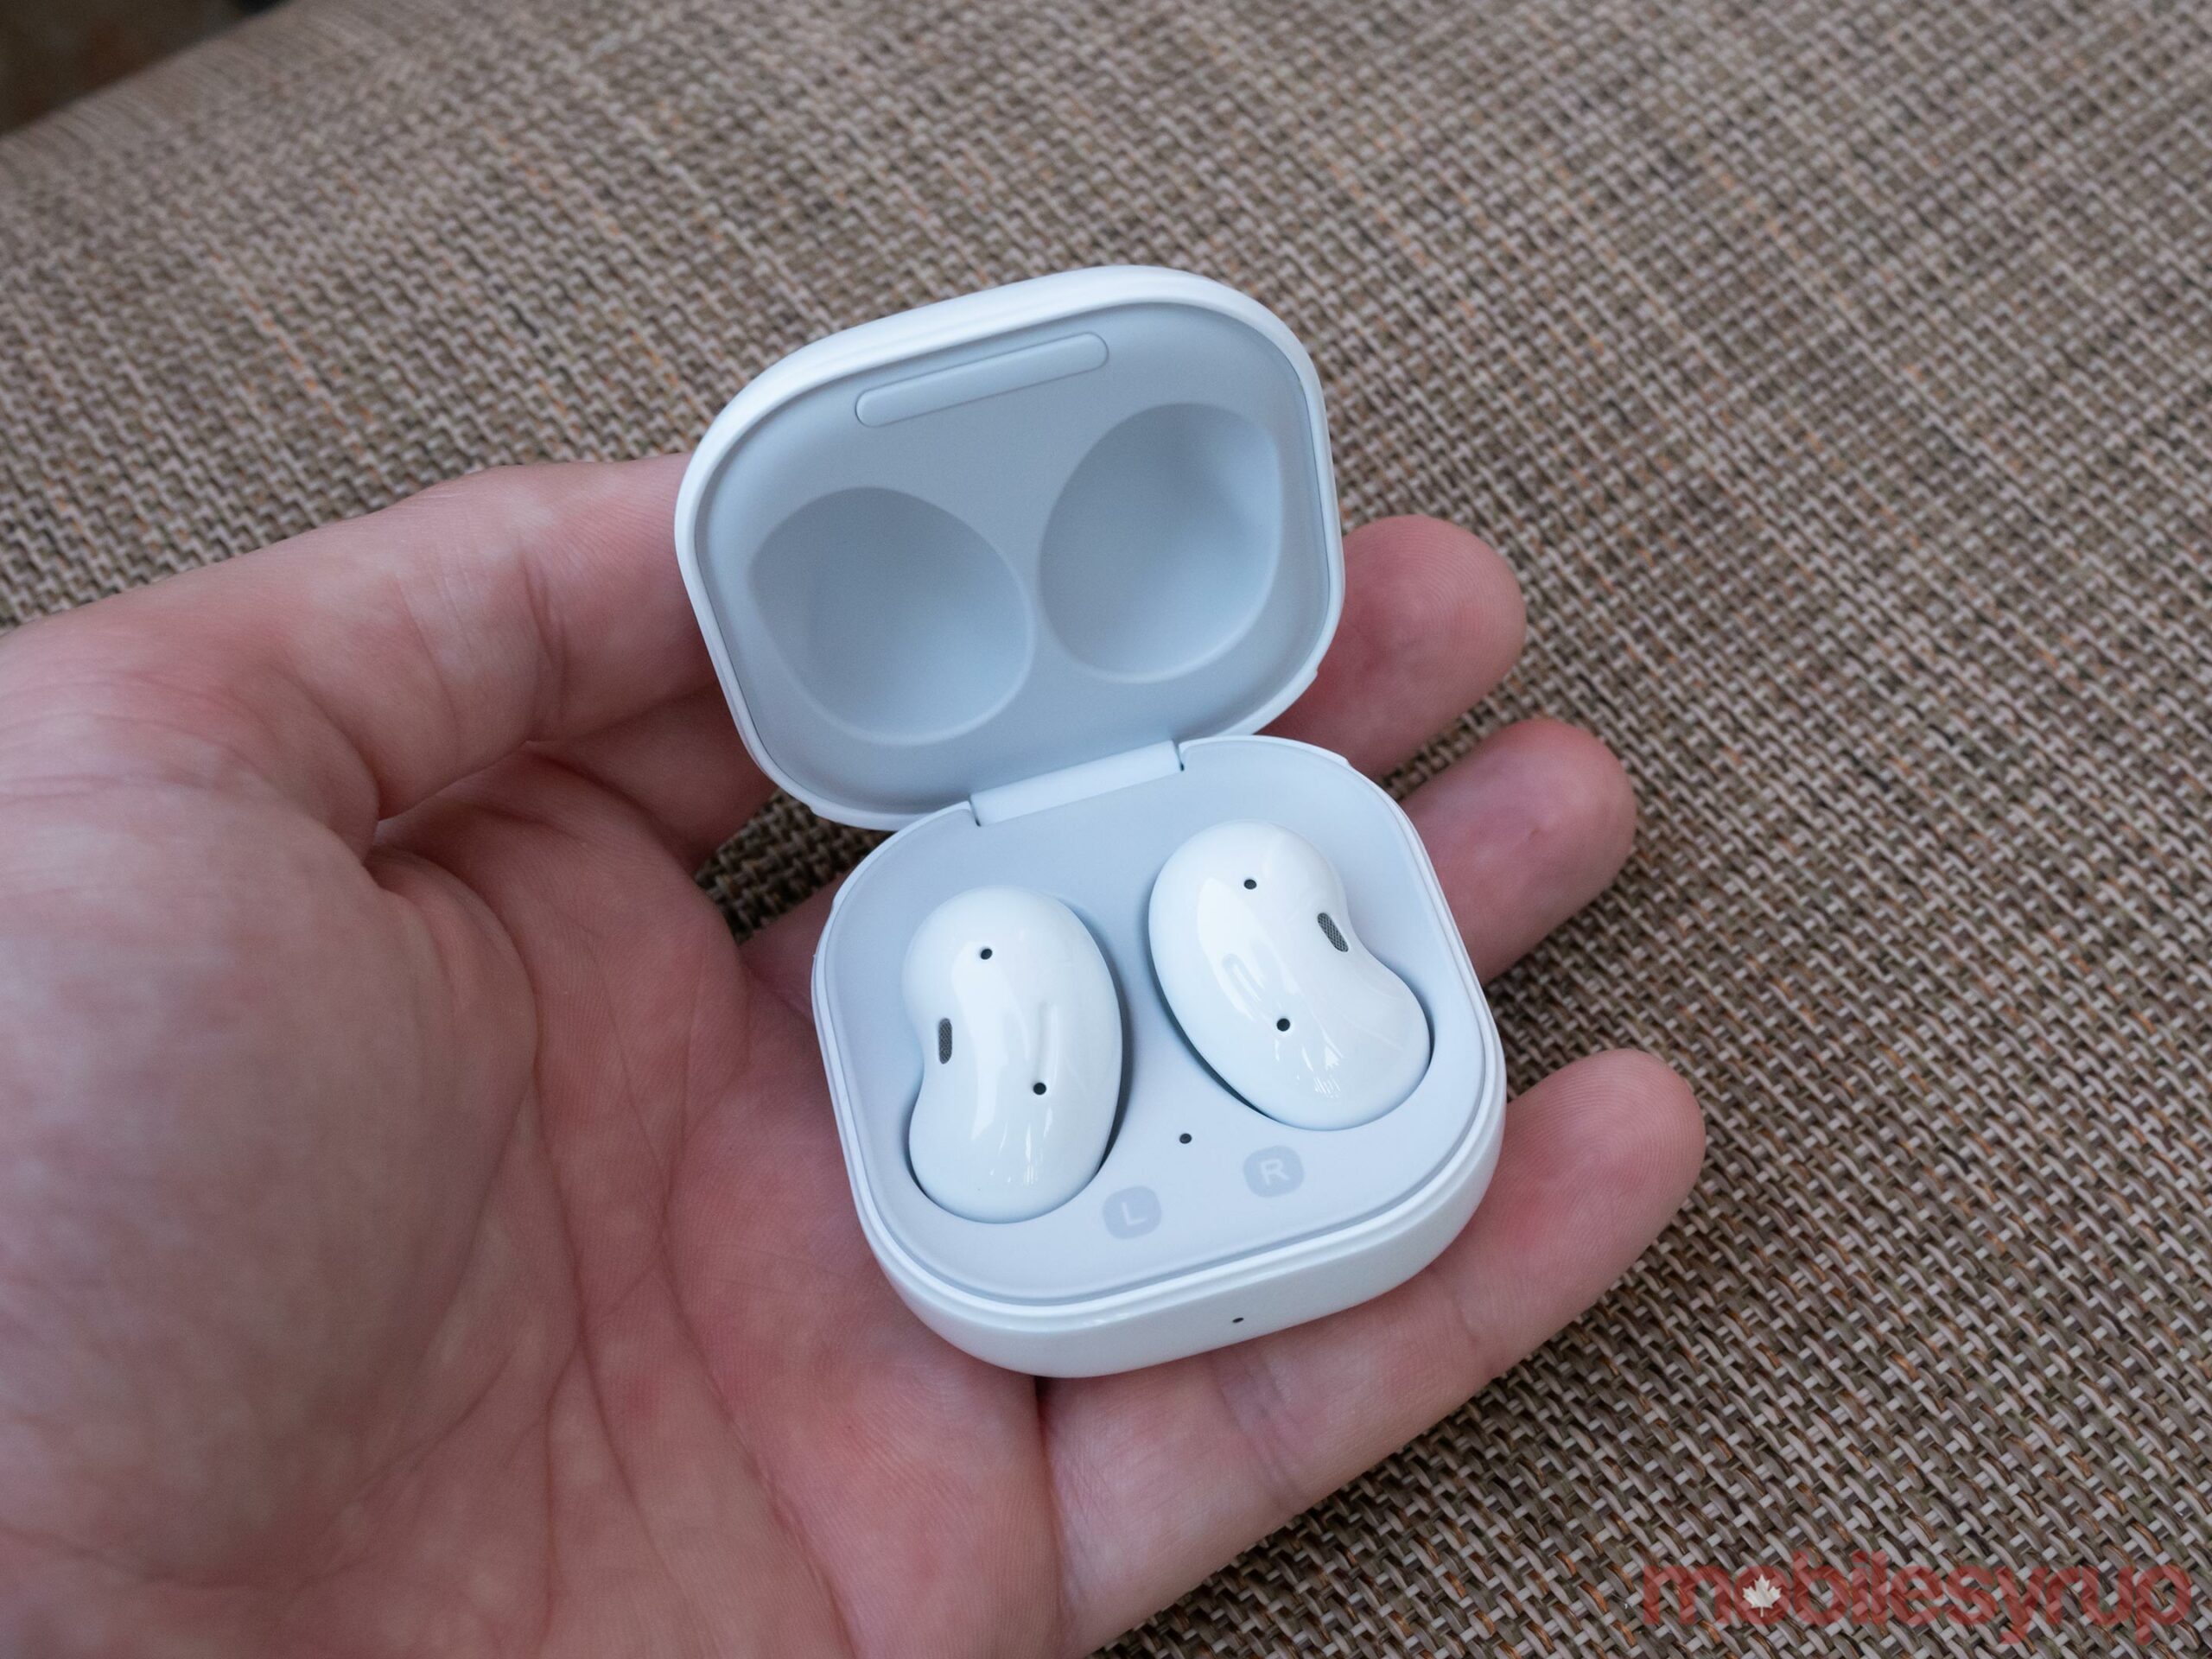 Galaxy Buds Live case opened